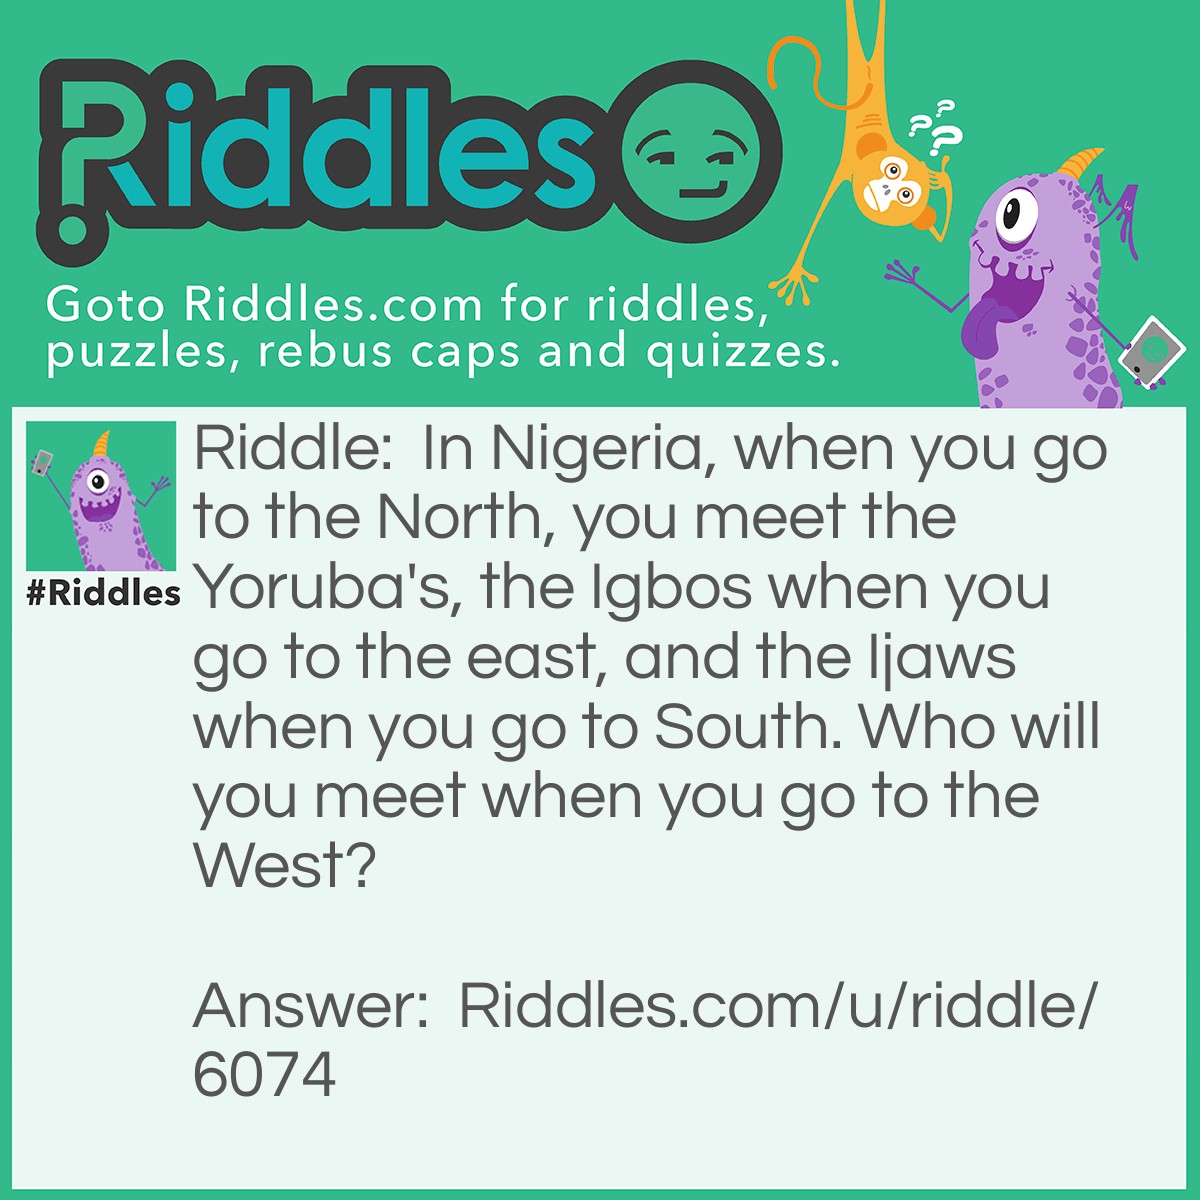 Riddle: In Nigeria, when you go to the North, you meet the Yoruba's, the Igbos when you go to the east, and the Ijaws when you go to South. Who will you meet when you go to the West? Answer: The dead. Because if you go to the West, you are dead, so you will meet the deads.